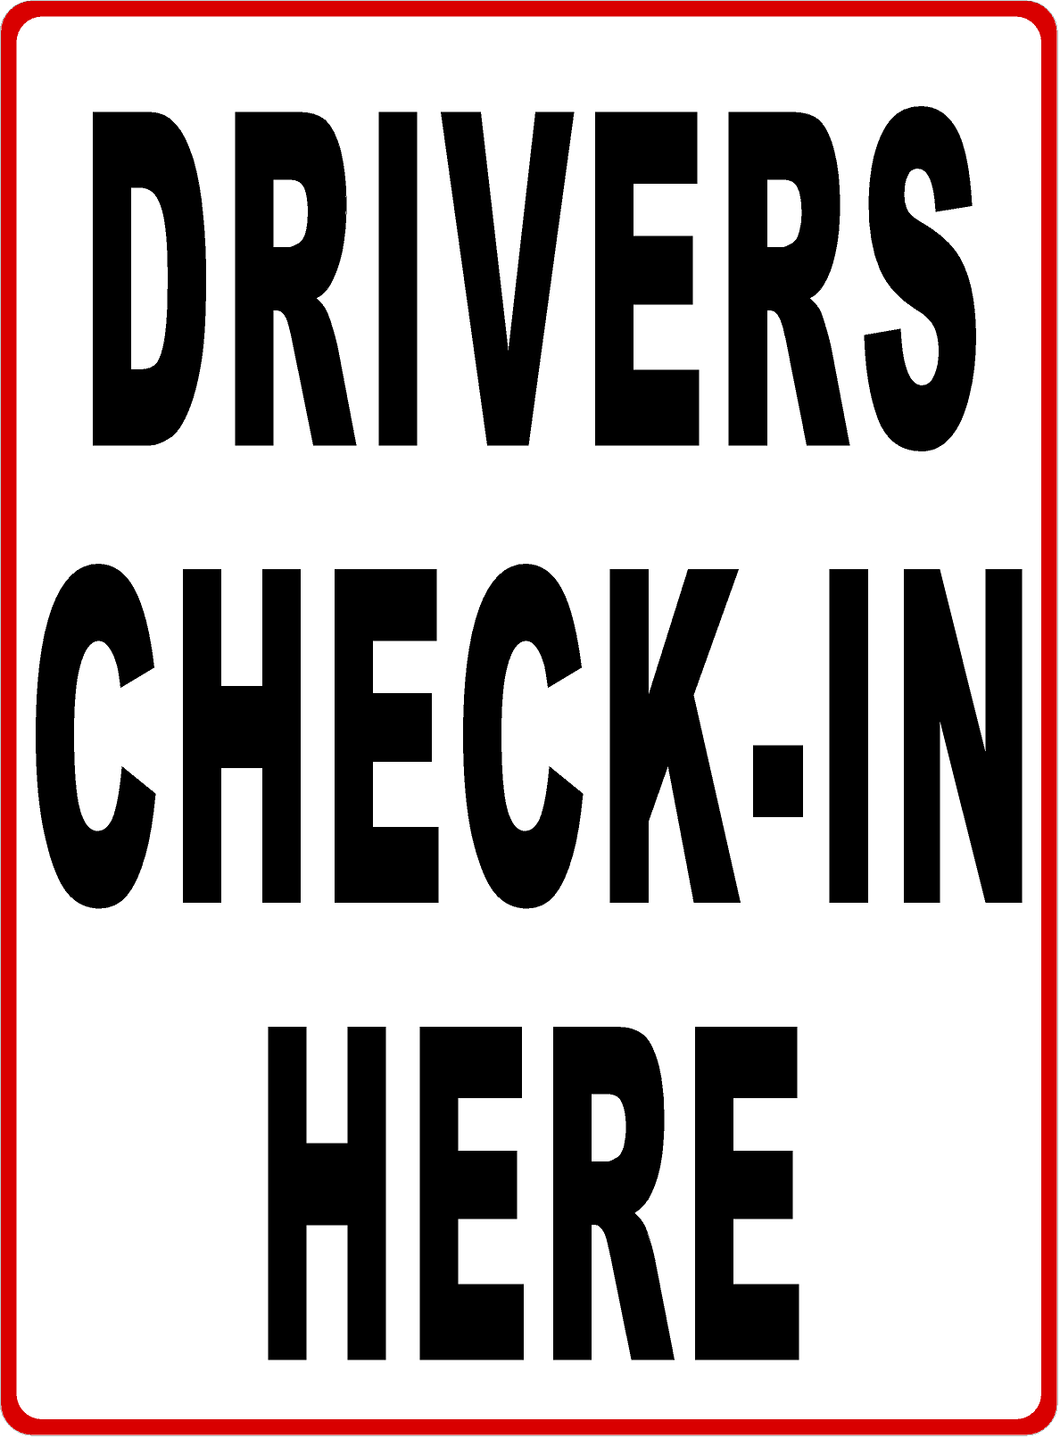 Distribution Center Check in Sign